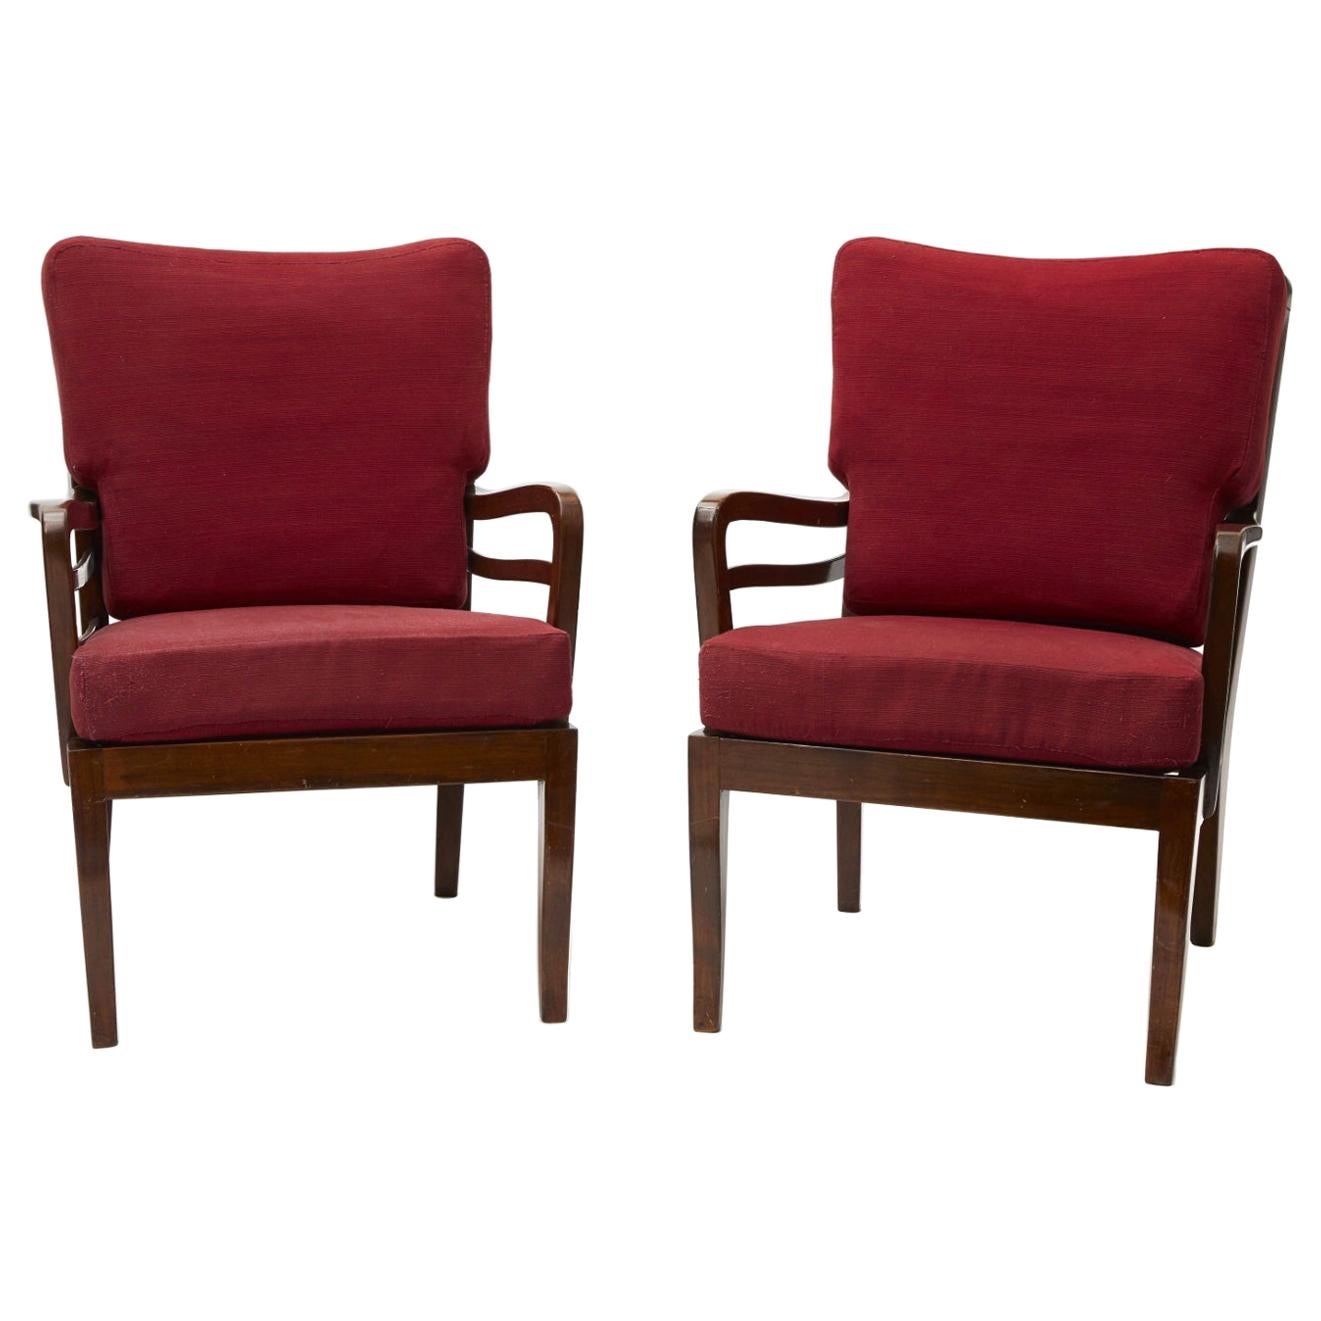 Cavatorta Pair of Armchairs Wood Padded Fabric, 1950, Italy For Sale